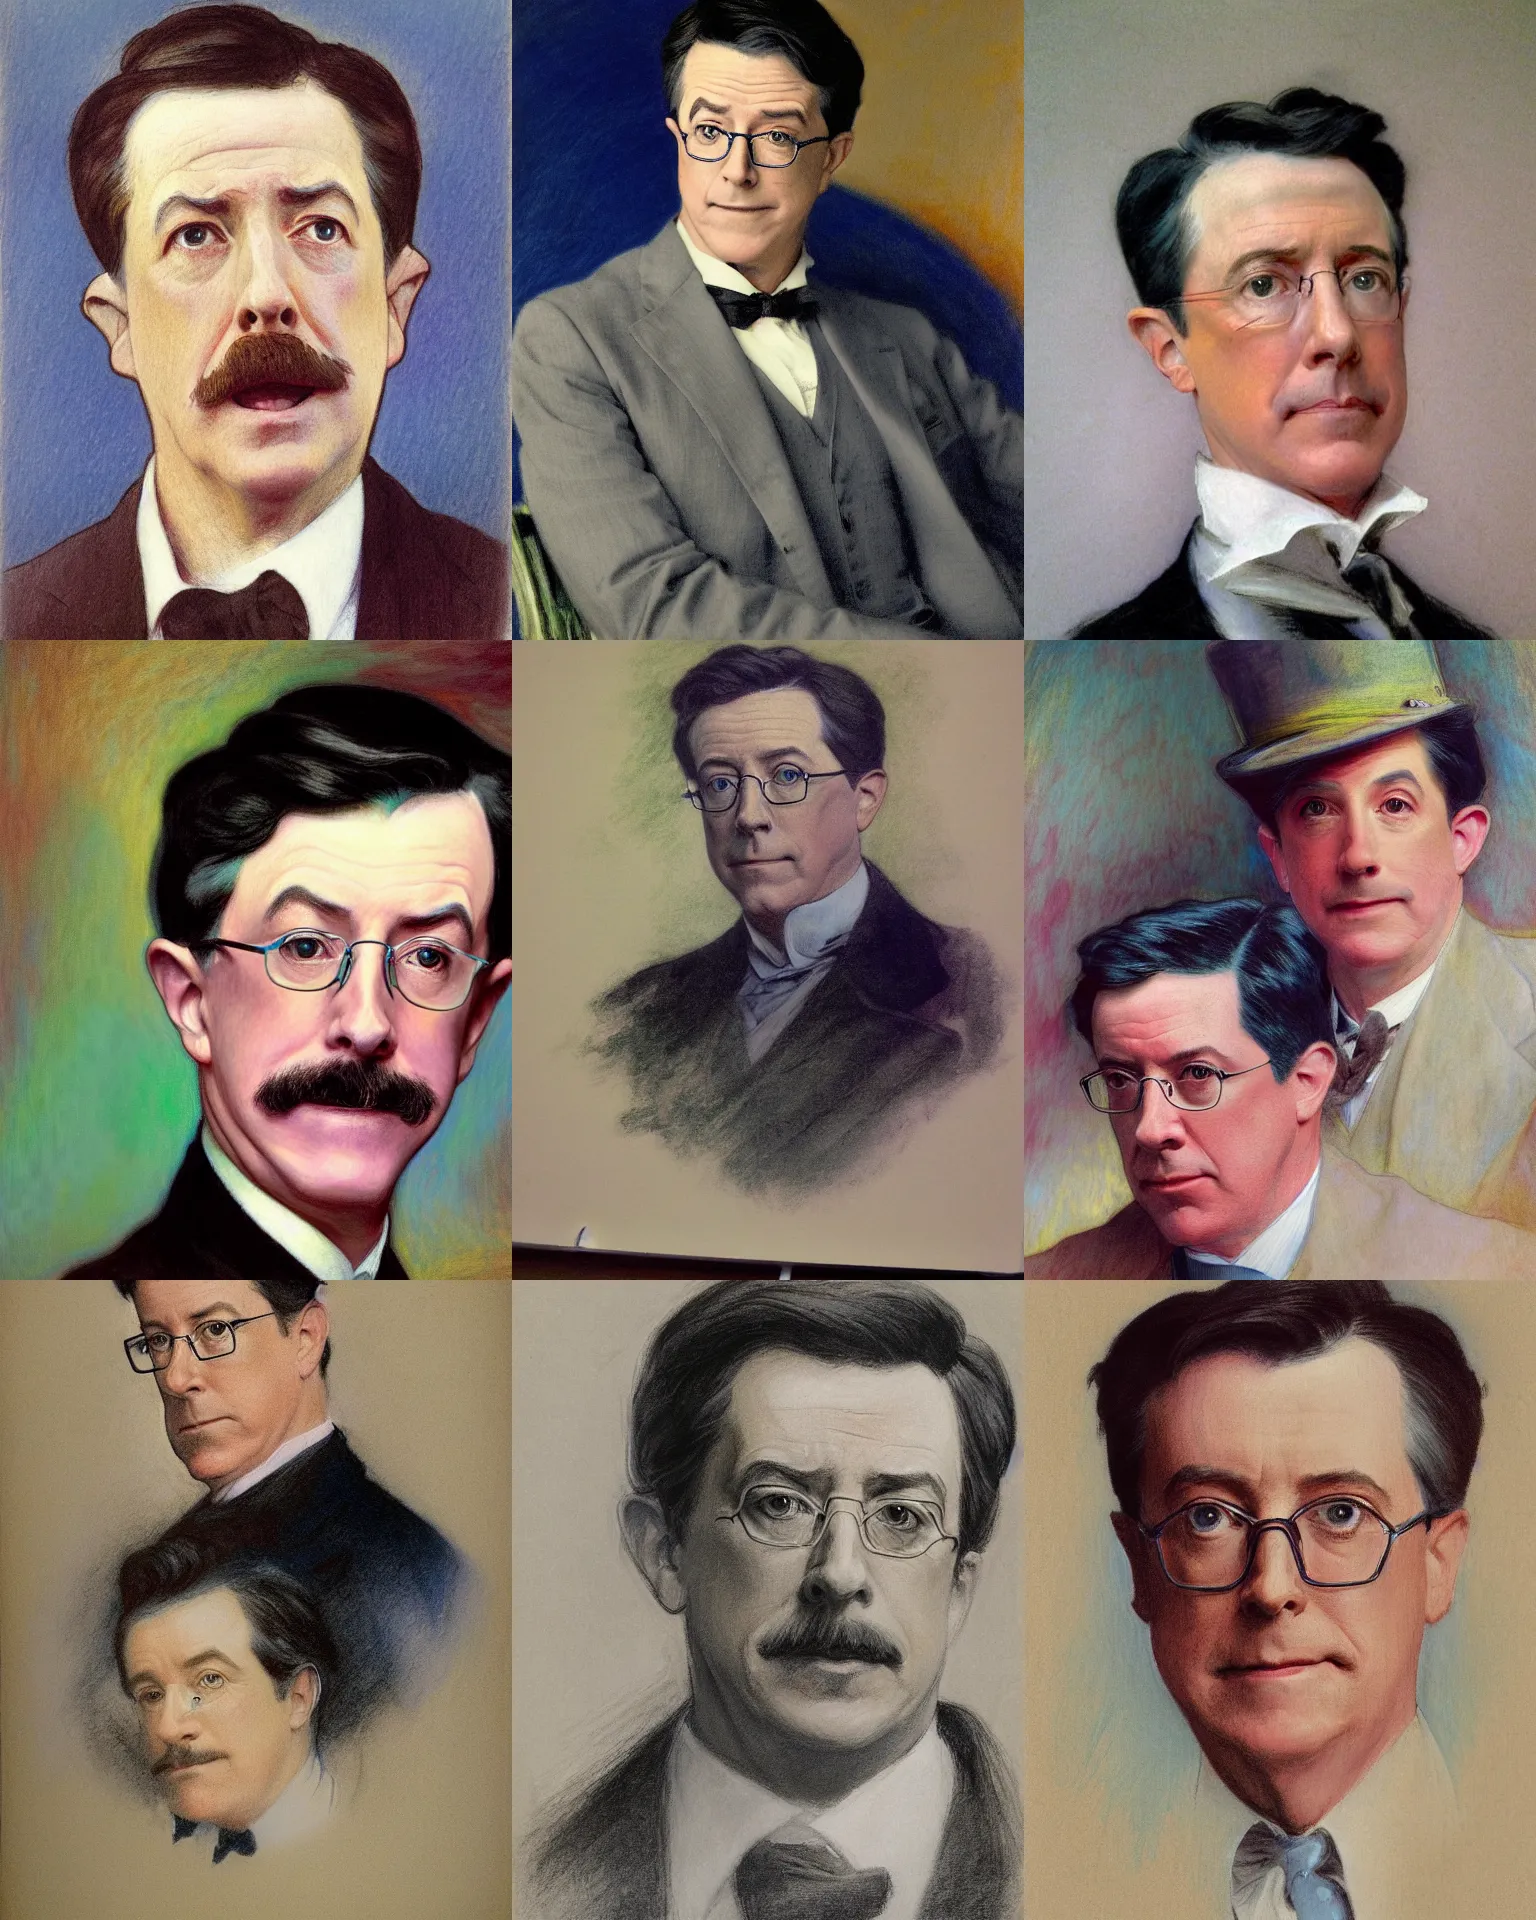 Prompt: colored chalk underdrawing linework portrait of steven colbert with one eyebrow raised by john singer sargent, thomas moran, edmund dulac, fans hals, alphonse mucha, fashion photography, fully clothed